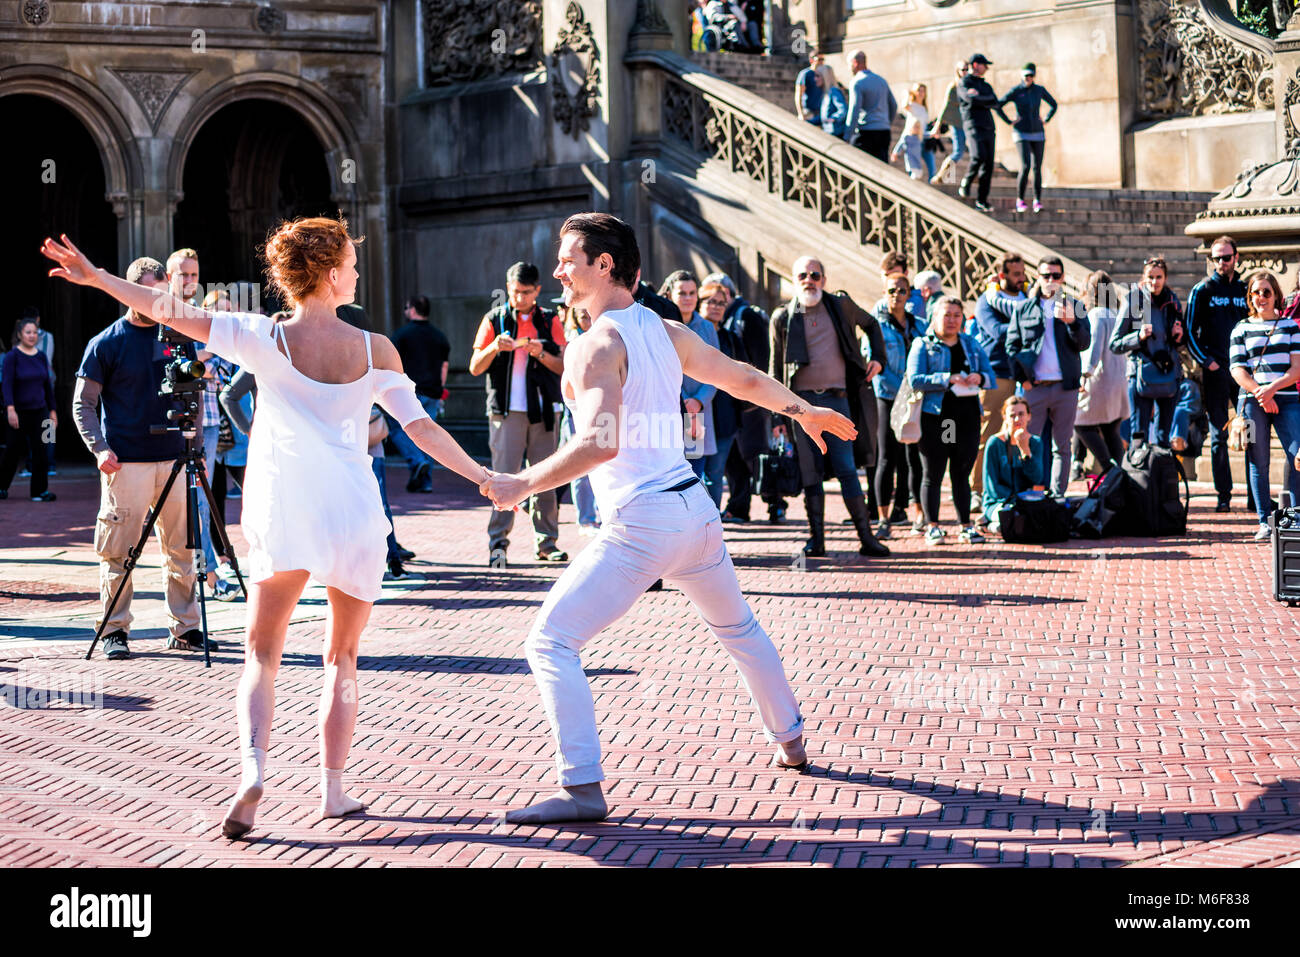 New York City, USA - October 28, 2017: Manhattan NYC Central park at Bethesda Arcade terrace couple of dancers in white clothing young millennials fil Stock Photo